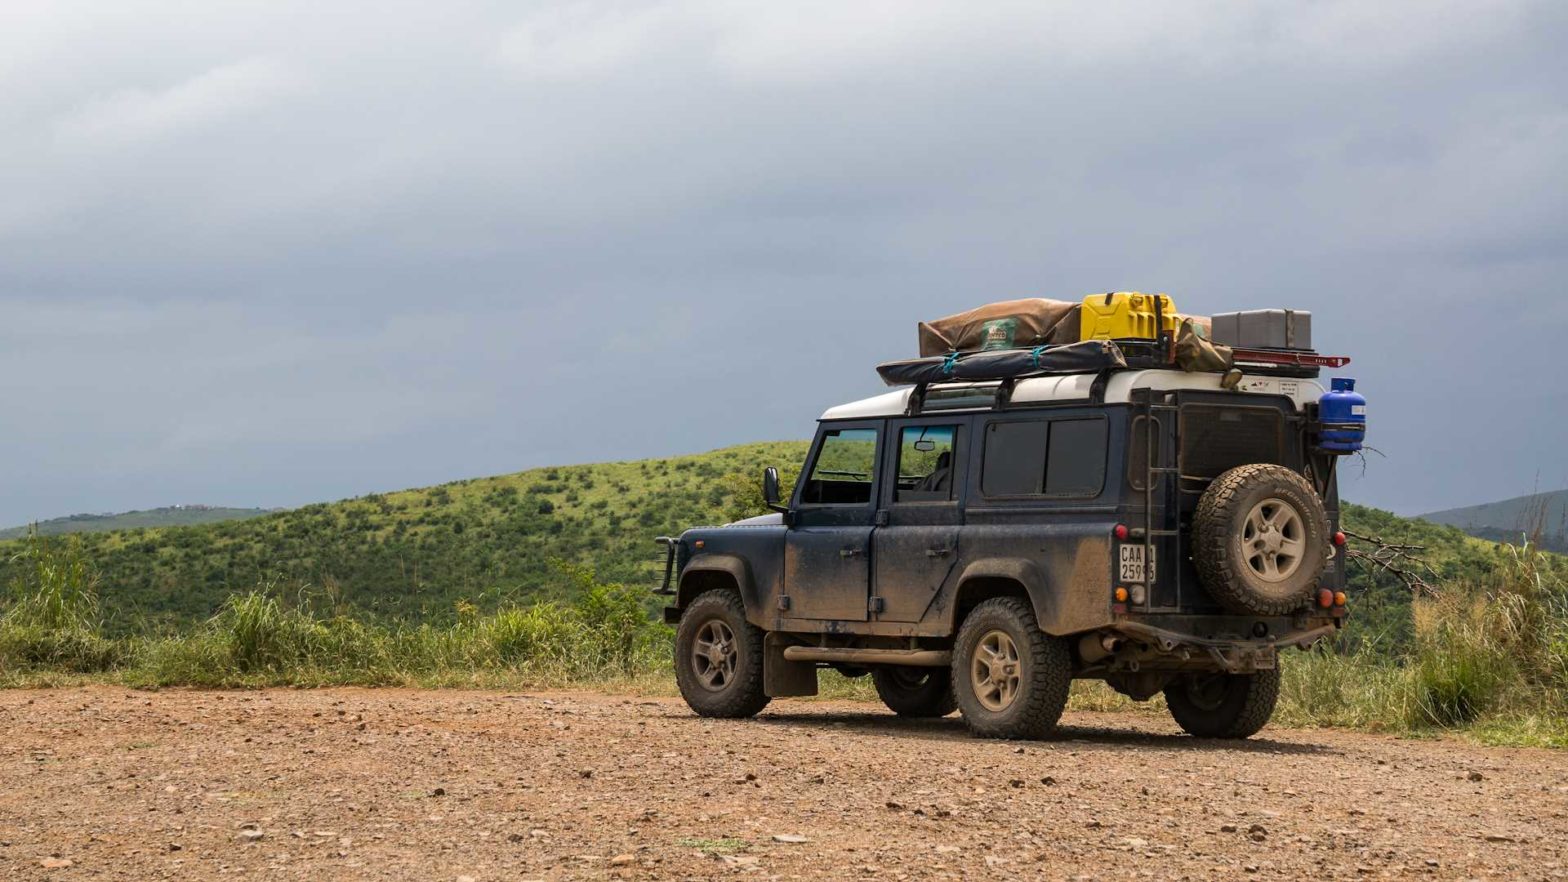 Our Defender Nyala on a gravel road in South Africa.